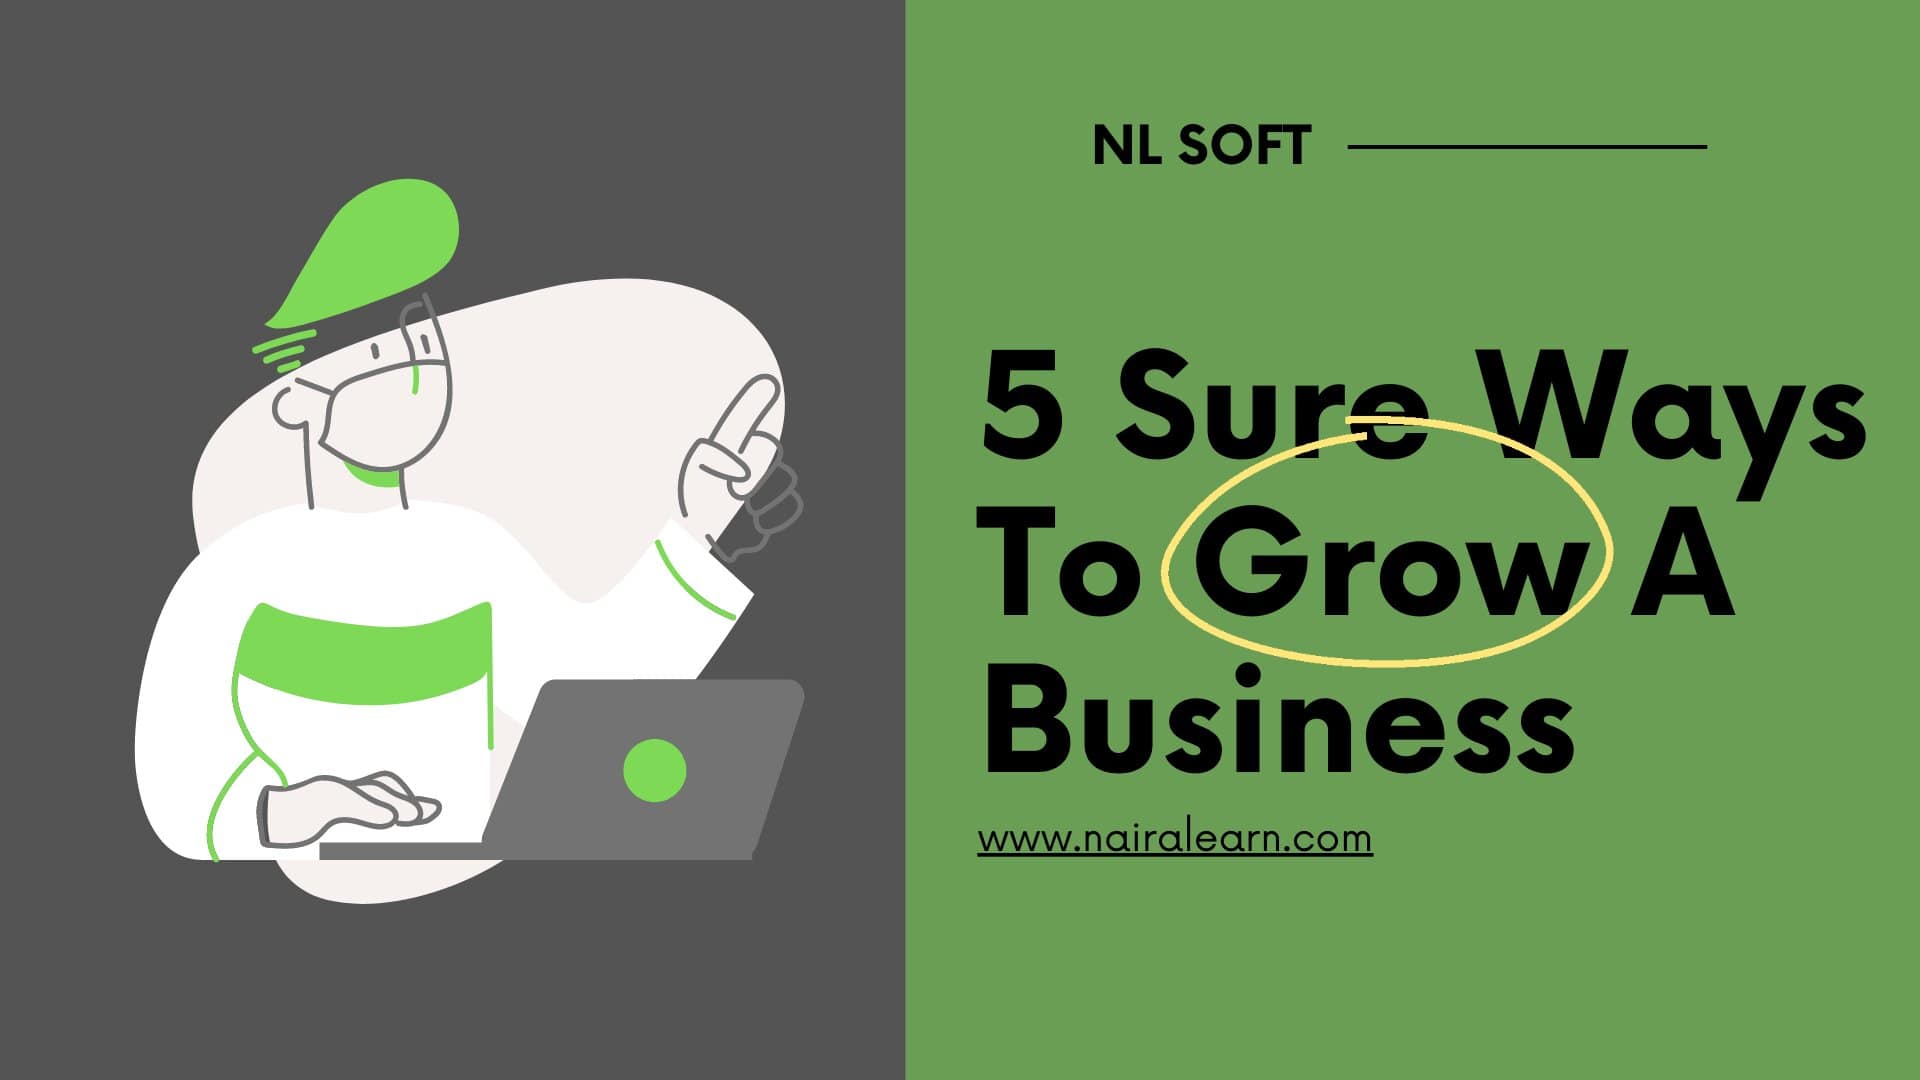 5 Sure Ways To Grow A Business